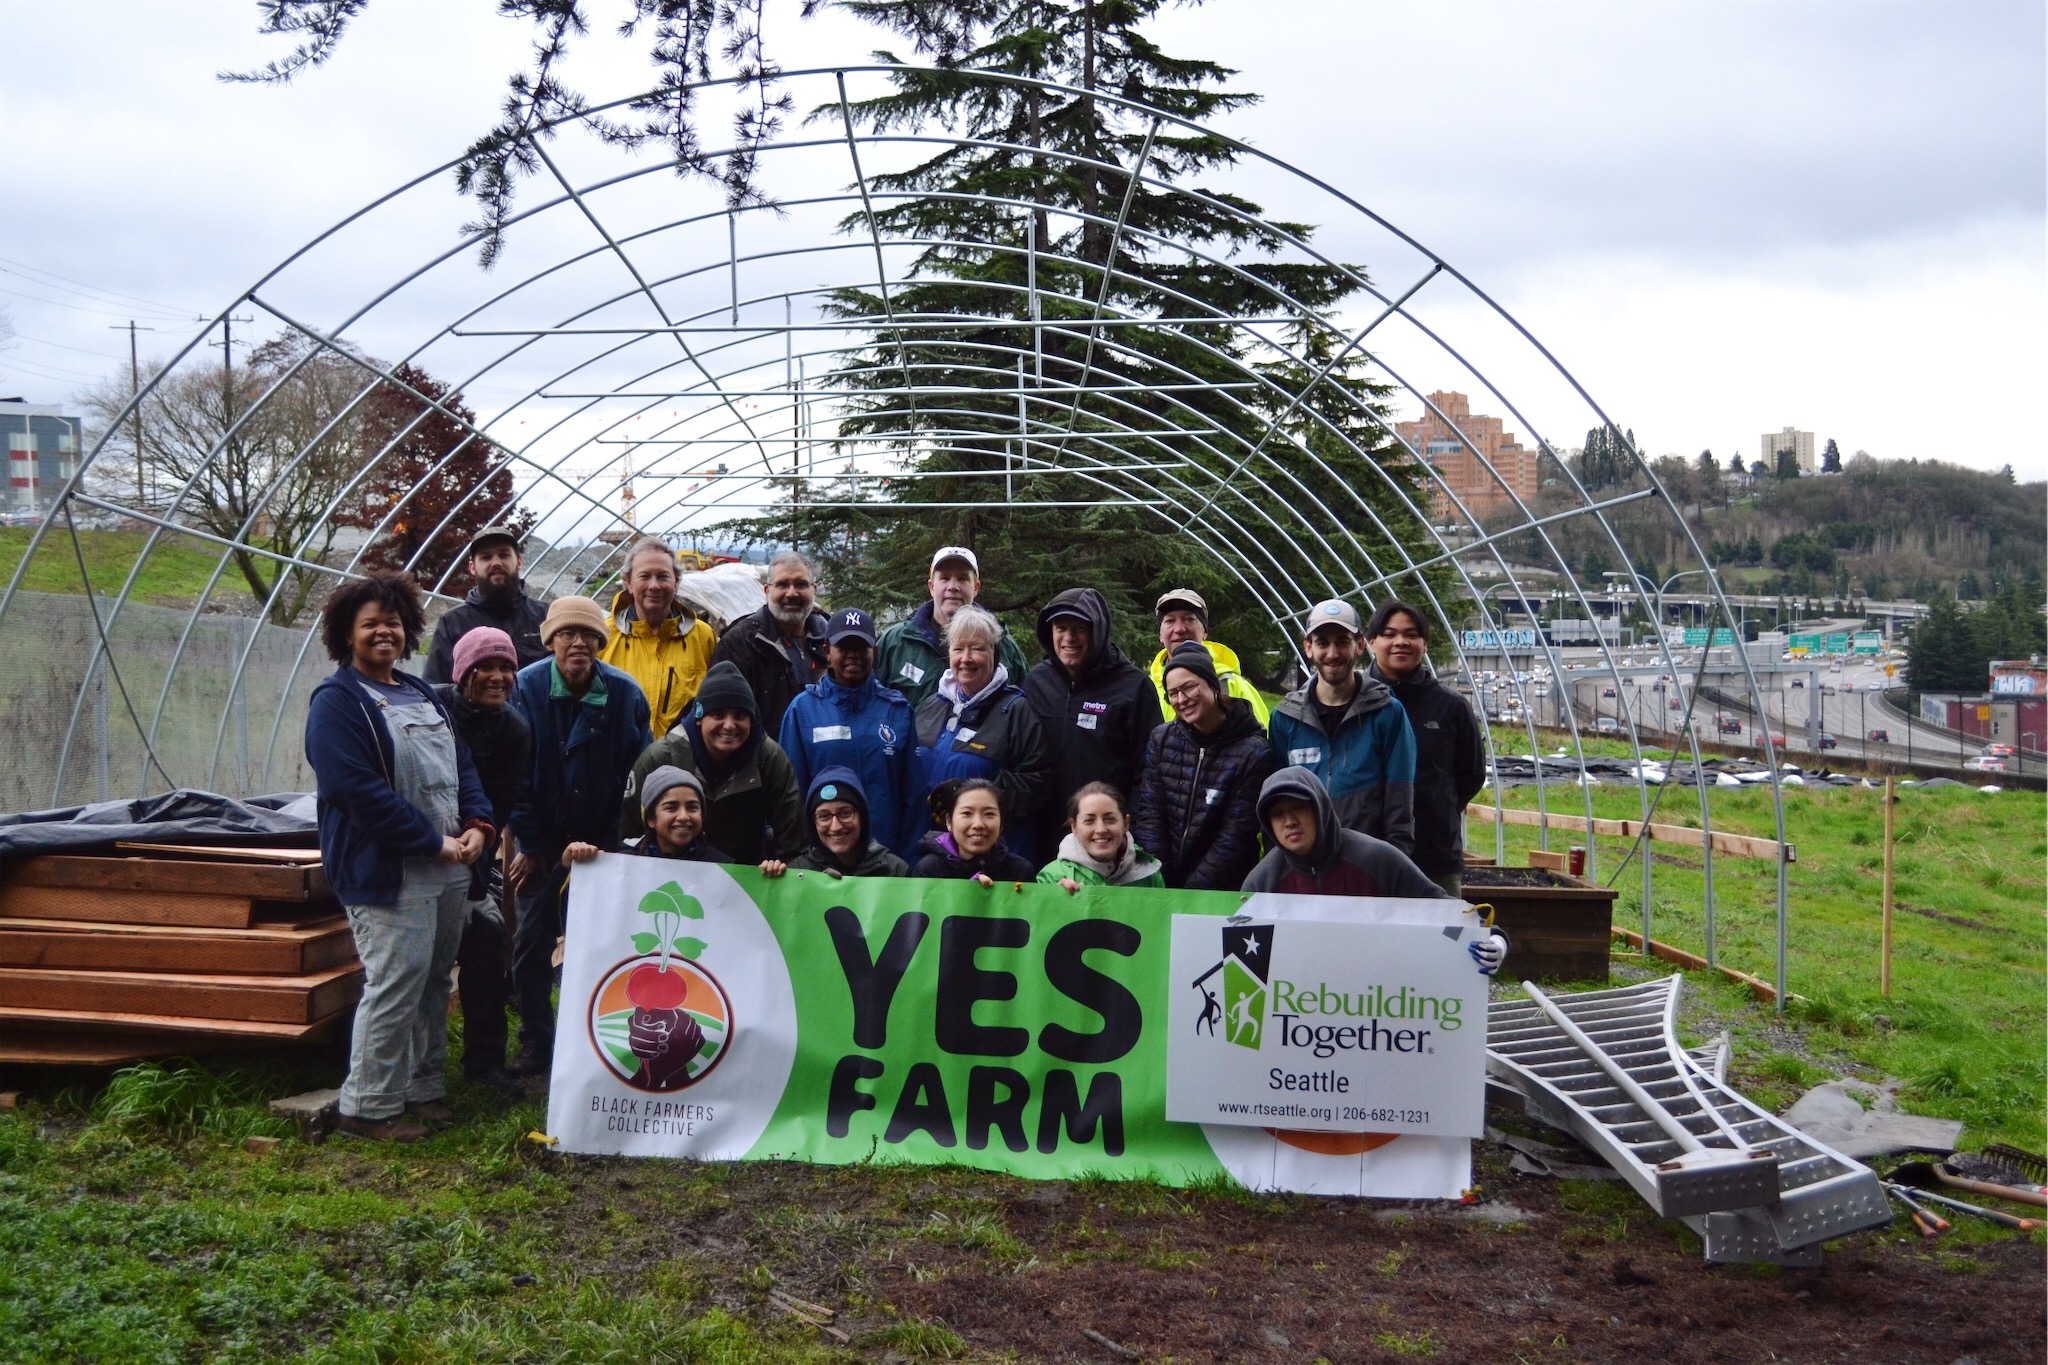 A group of smiling people in greenspace surrounded by the city, holding up a large Yes Farm sign.